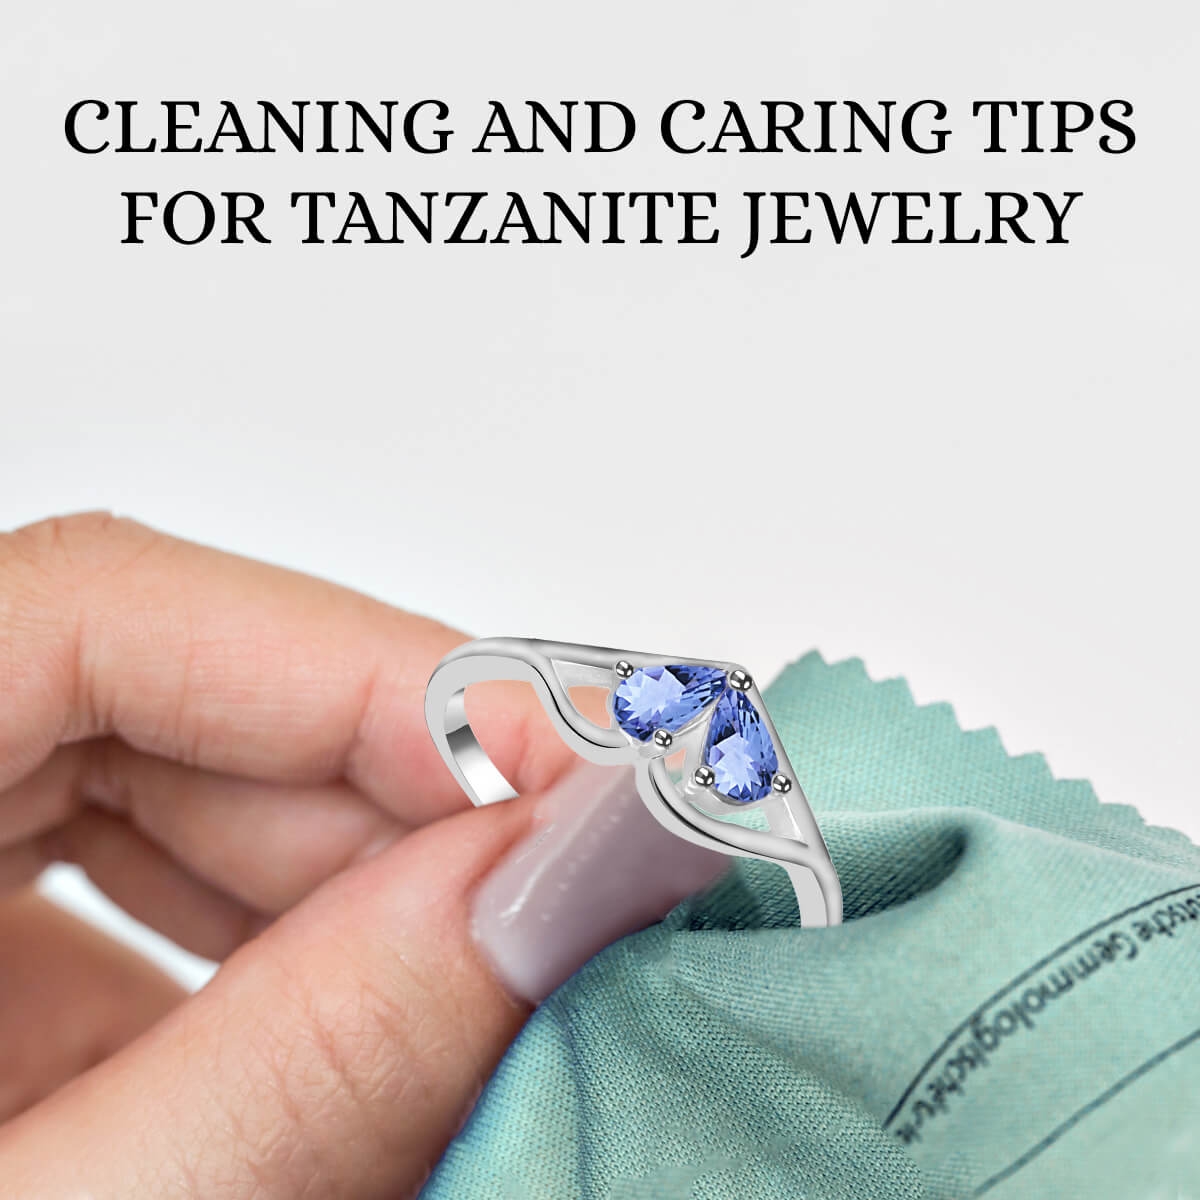 How to Clean and Care of Tanzanite Jewelry